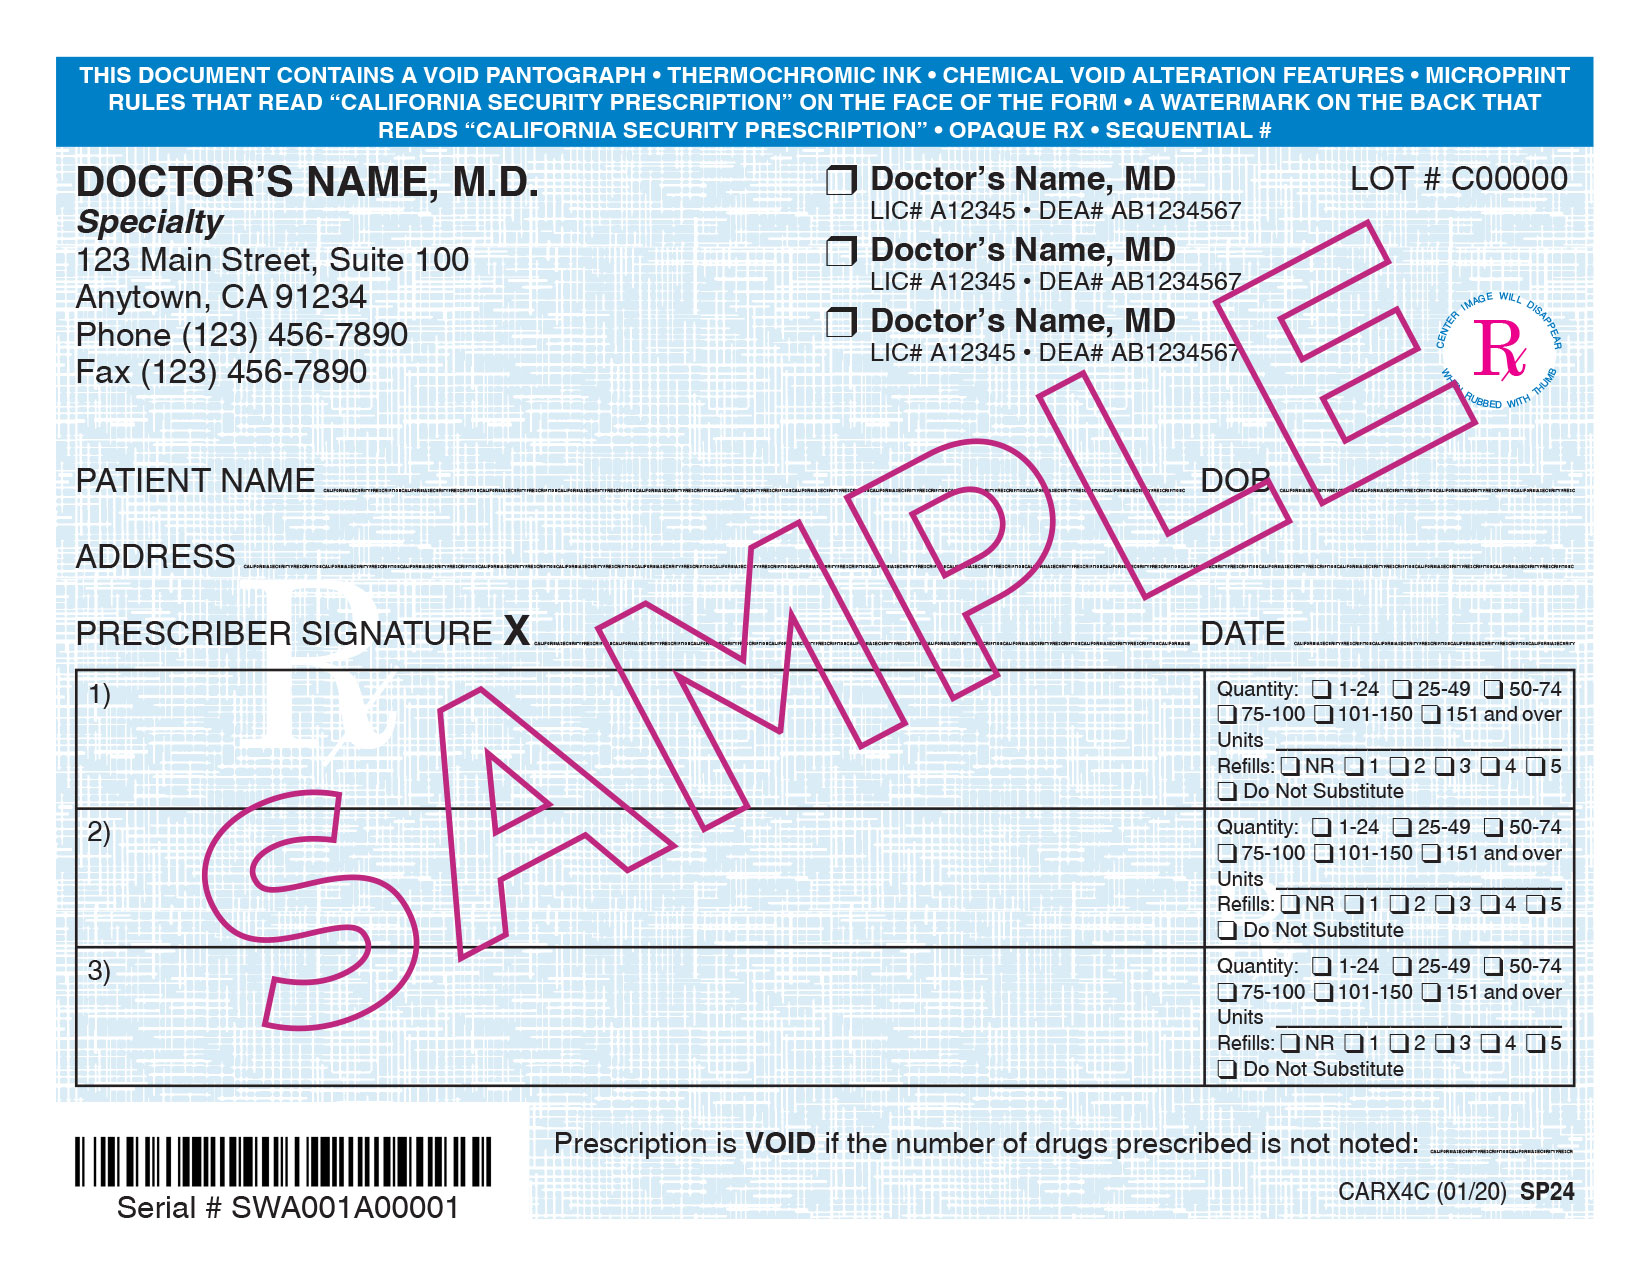 Engraved Name Tag - Compliant Secure Rx Forms & Rx Pads for US Prescribers